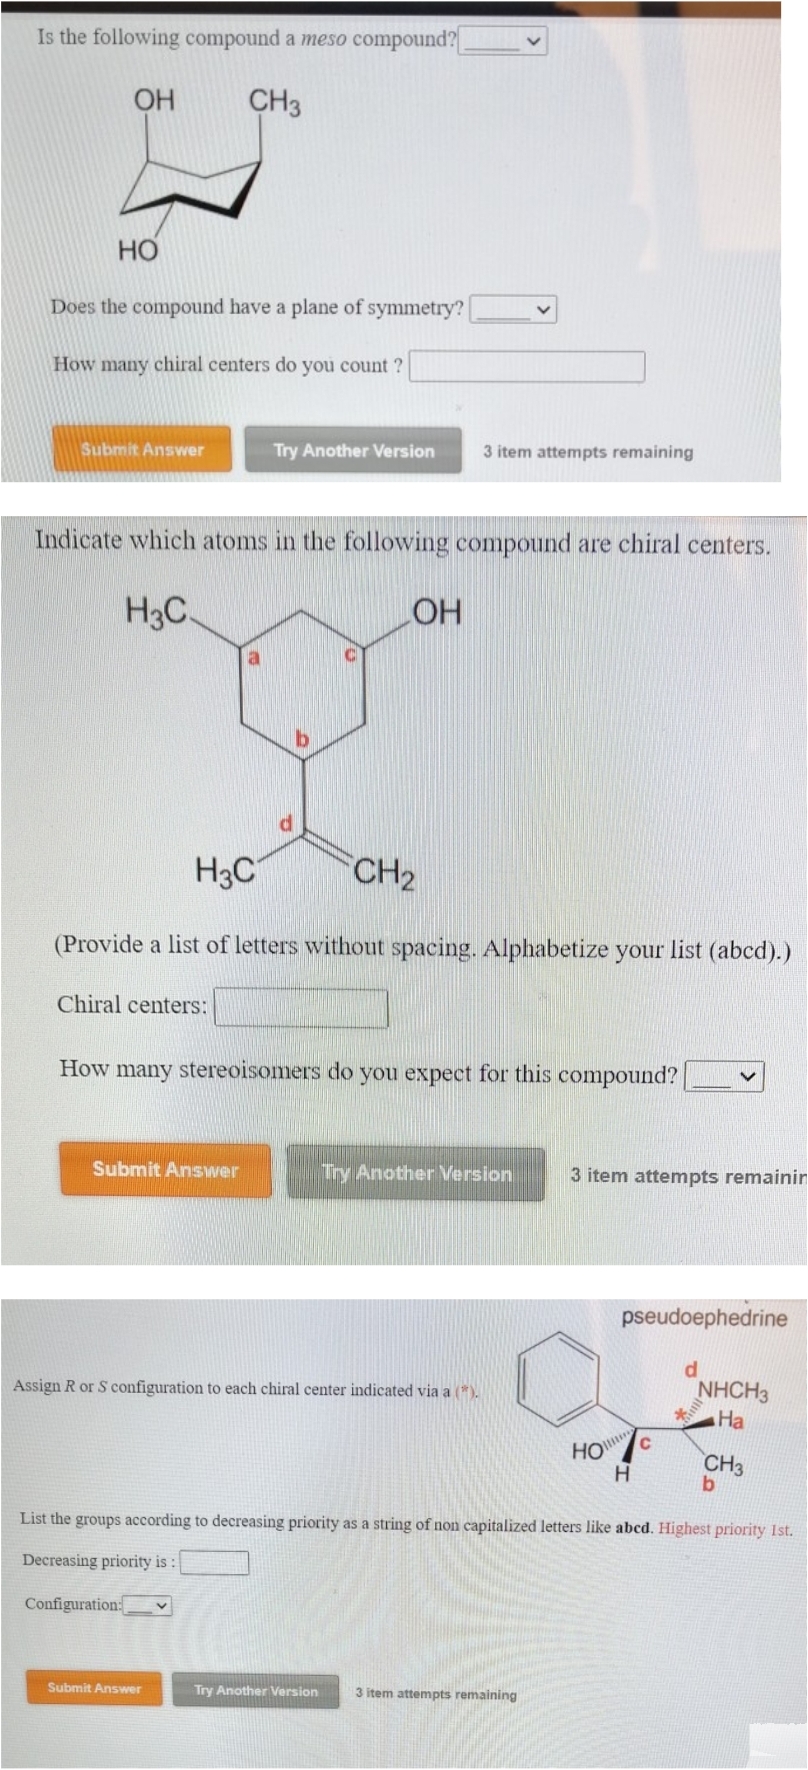 Is the following compound a meso compound?
OH
CH3
HO
Does the compound have a plane of symmetry?
How many chiral centers do you count?
Submit Answer
Indicate which atoms in the following compound are chiral centers.
H3C.
Chiral centers:
Try Another Version
Submit Answer
d
b
H3C
(Provide a list of letters without spacing. Alphabetize your list (abcd).)
Configuration:
Submit Answer
LOH
How many stereoisomers do you expect for this compound?
CH₂
3 item attempts remaining
Assign R or S configuration to each chiral center indicated via a (*).
Try Another Version
Try Another Version
3 item attempts remainin
3 item attempts remaining
HO
pseudoephedrine
H
C
d
List the groups according to decreasing priority as a string of non capitalized letters like abcd. Highest priority 1st.
Decreasing priority is:
*
NHCH3
Ha
CH3
b